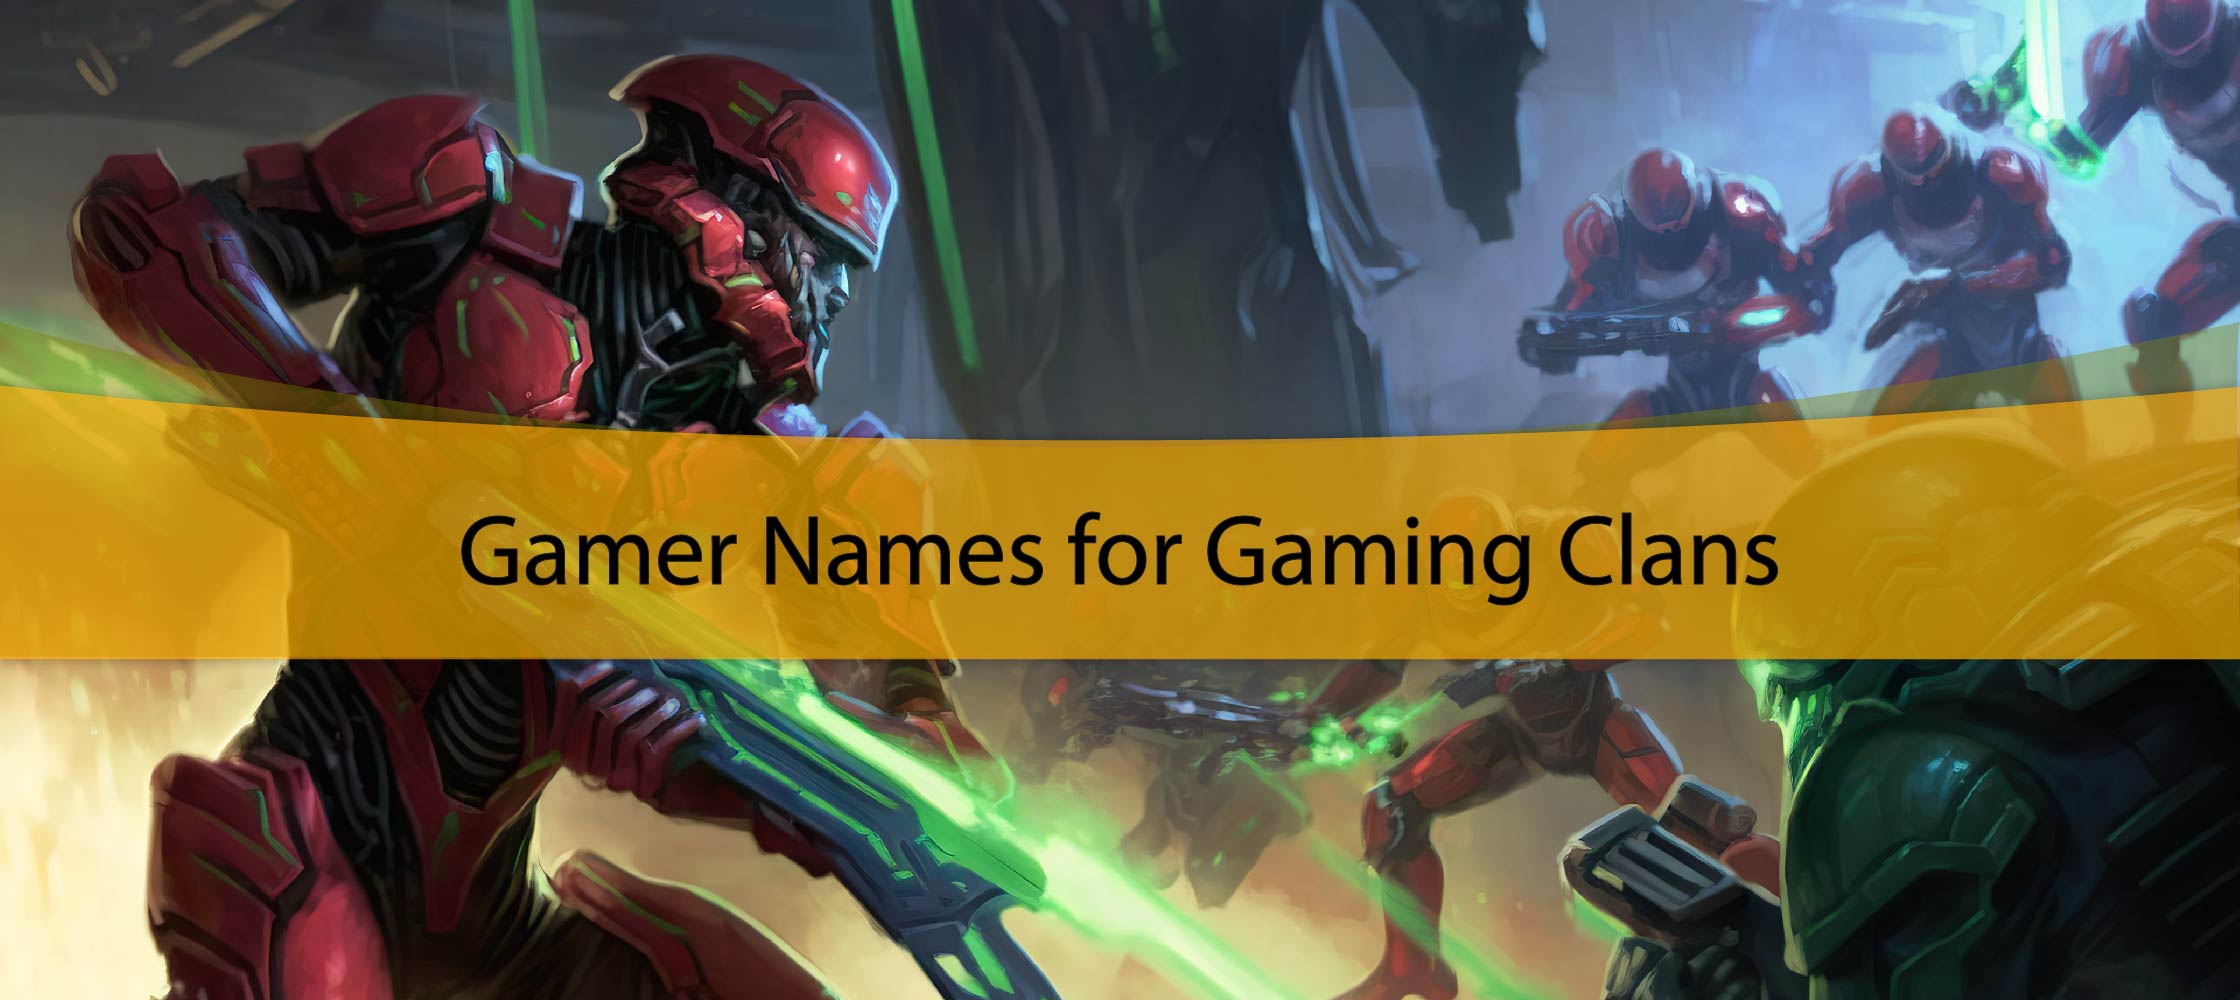 Gamer Names for Gaming Clans